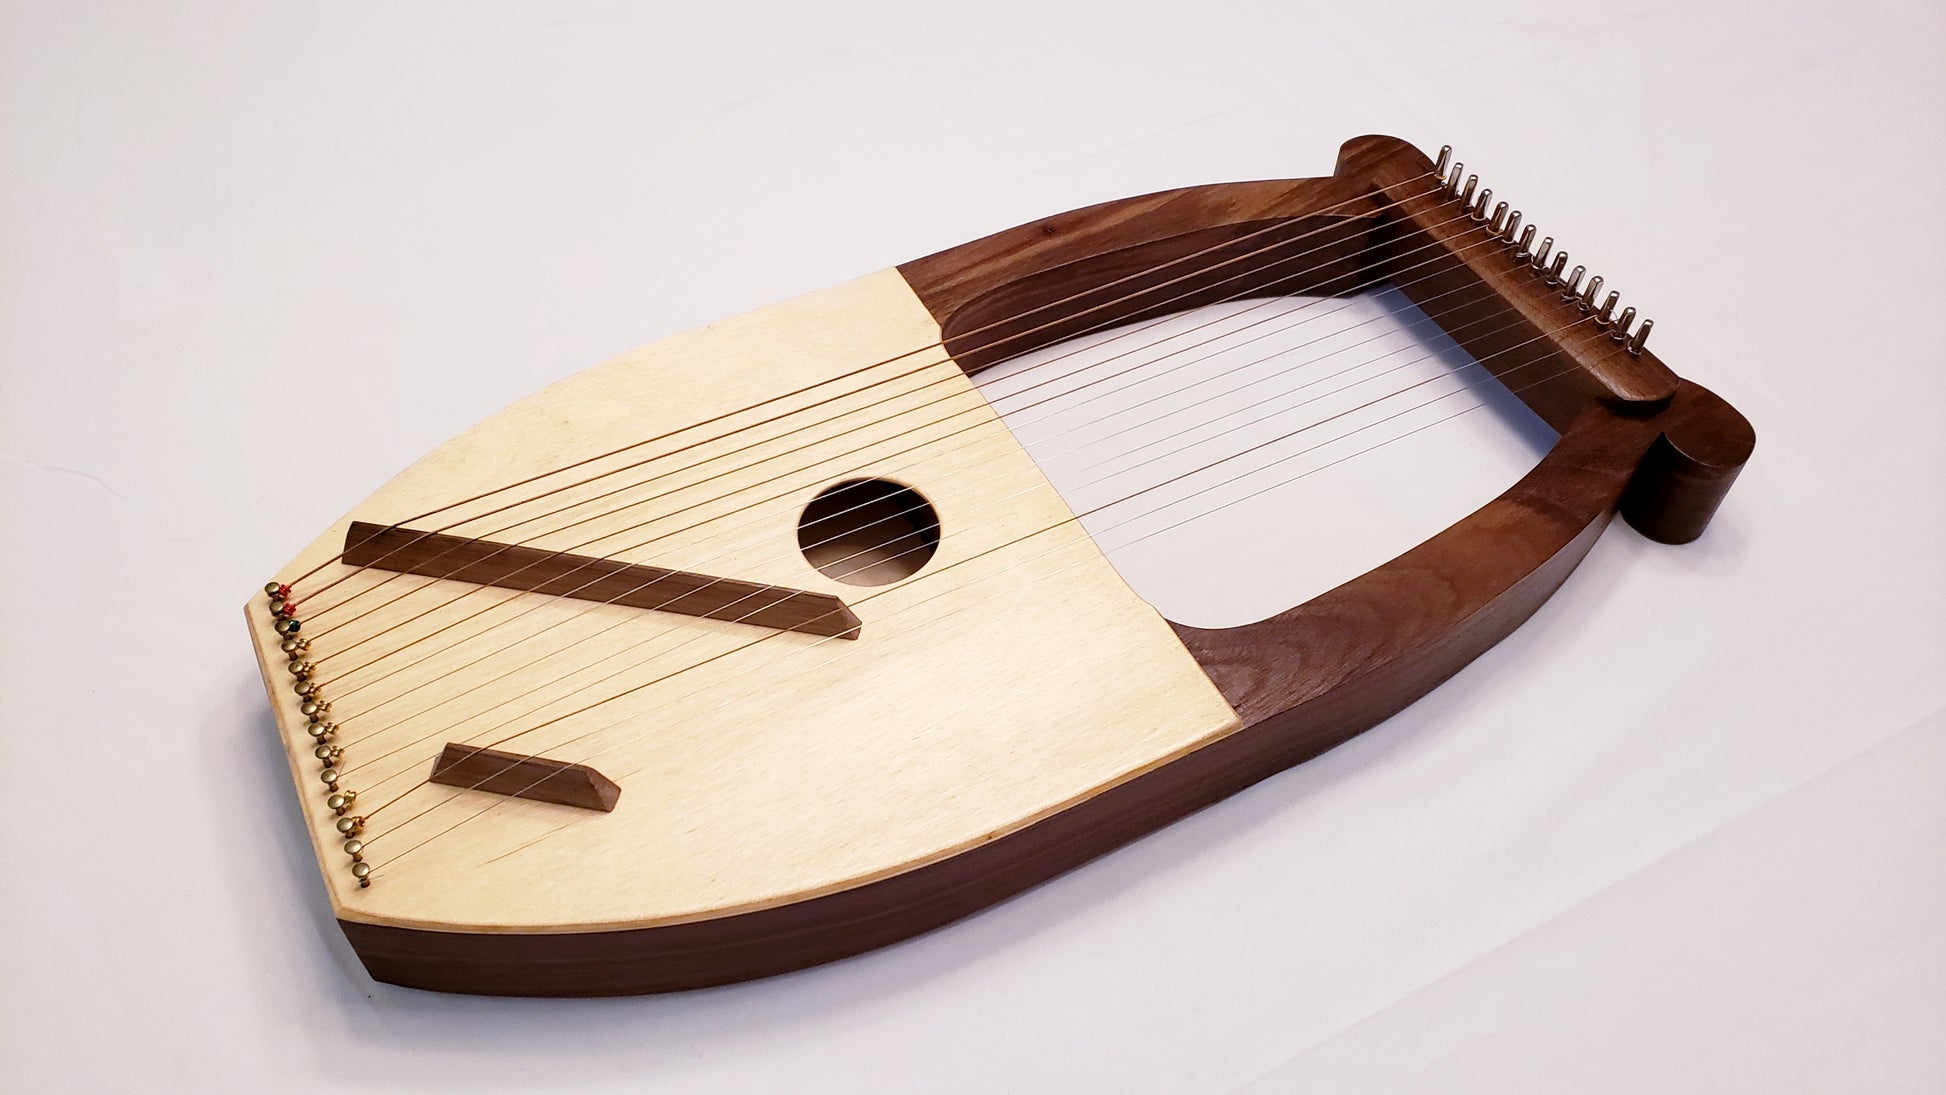 David's Harp 14 Stringed: Right Side View